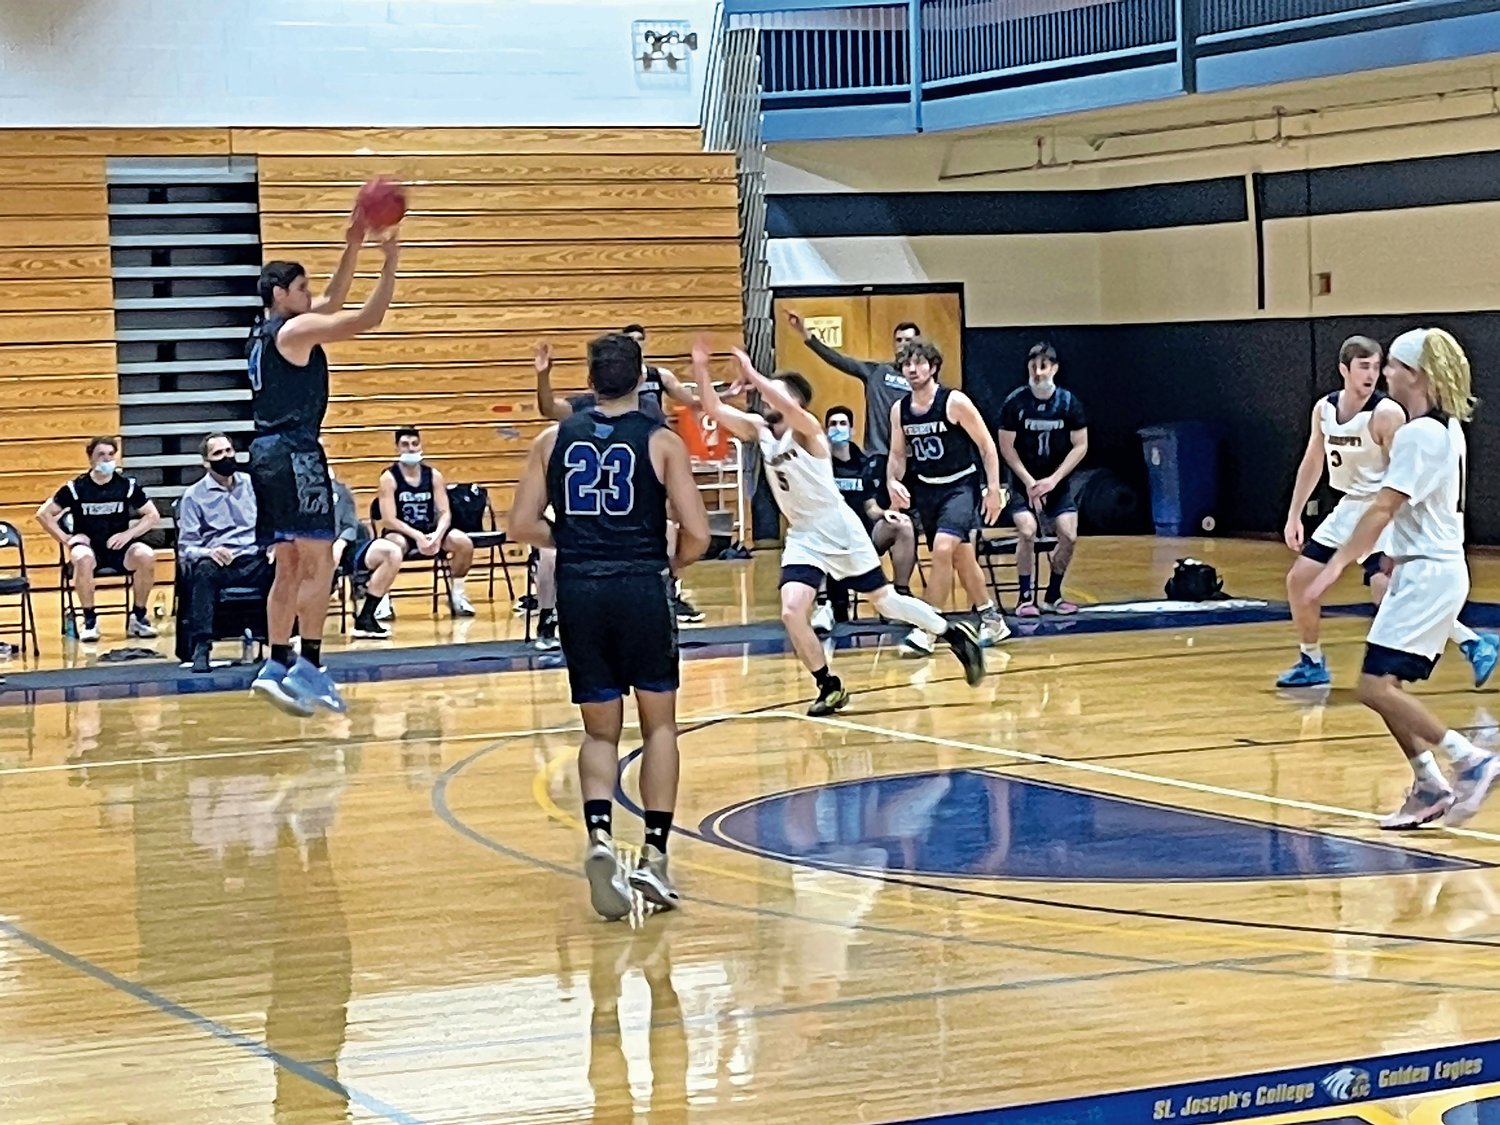 Yeshiva University forward and Lawrence native Gabriel Leifer lifted a 3-point shot in the second half of the Maccabees’ 82-58 win over St. Joseph’s College in Patchogue last Sunday.